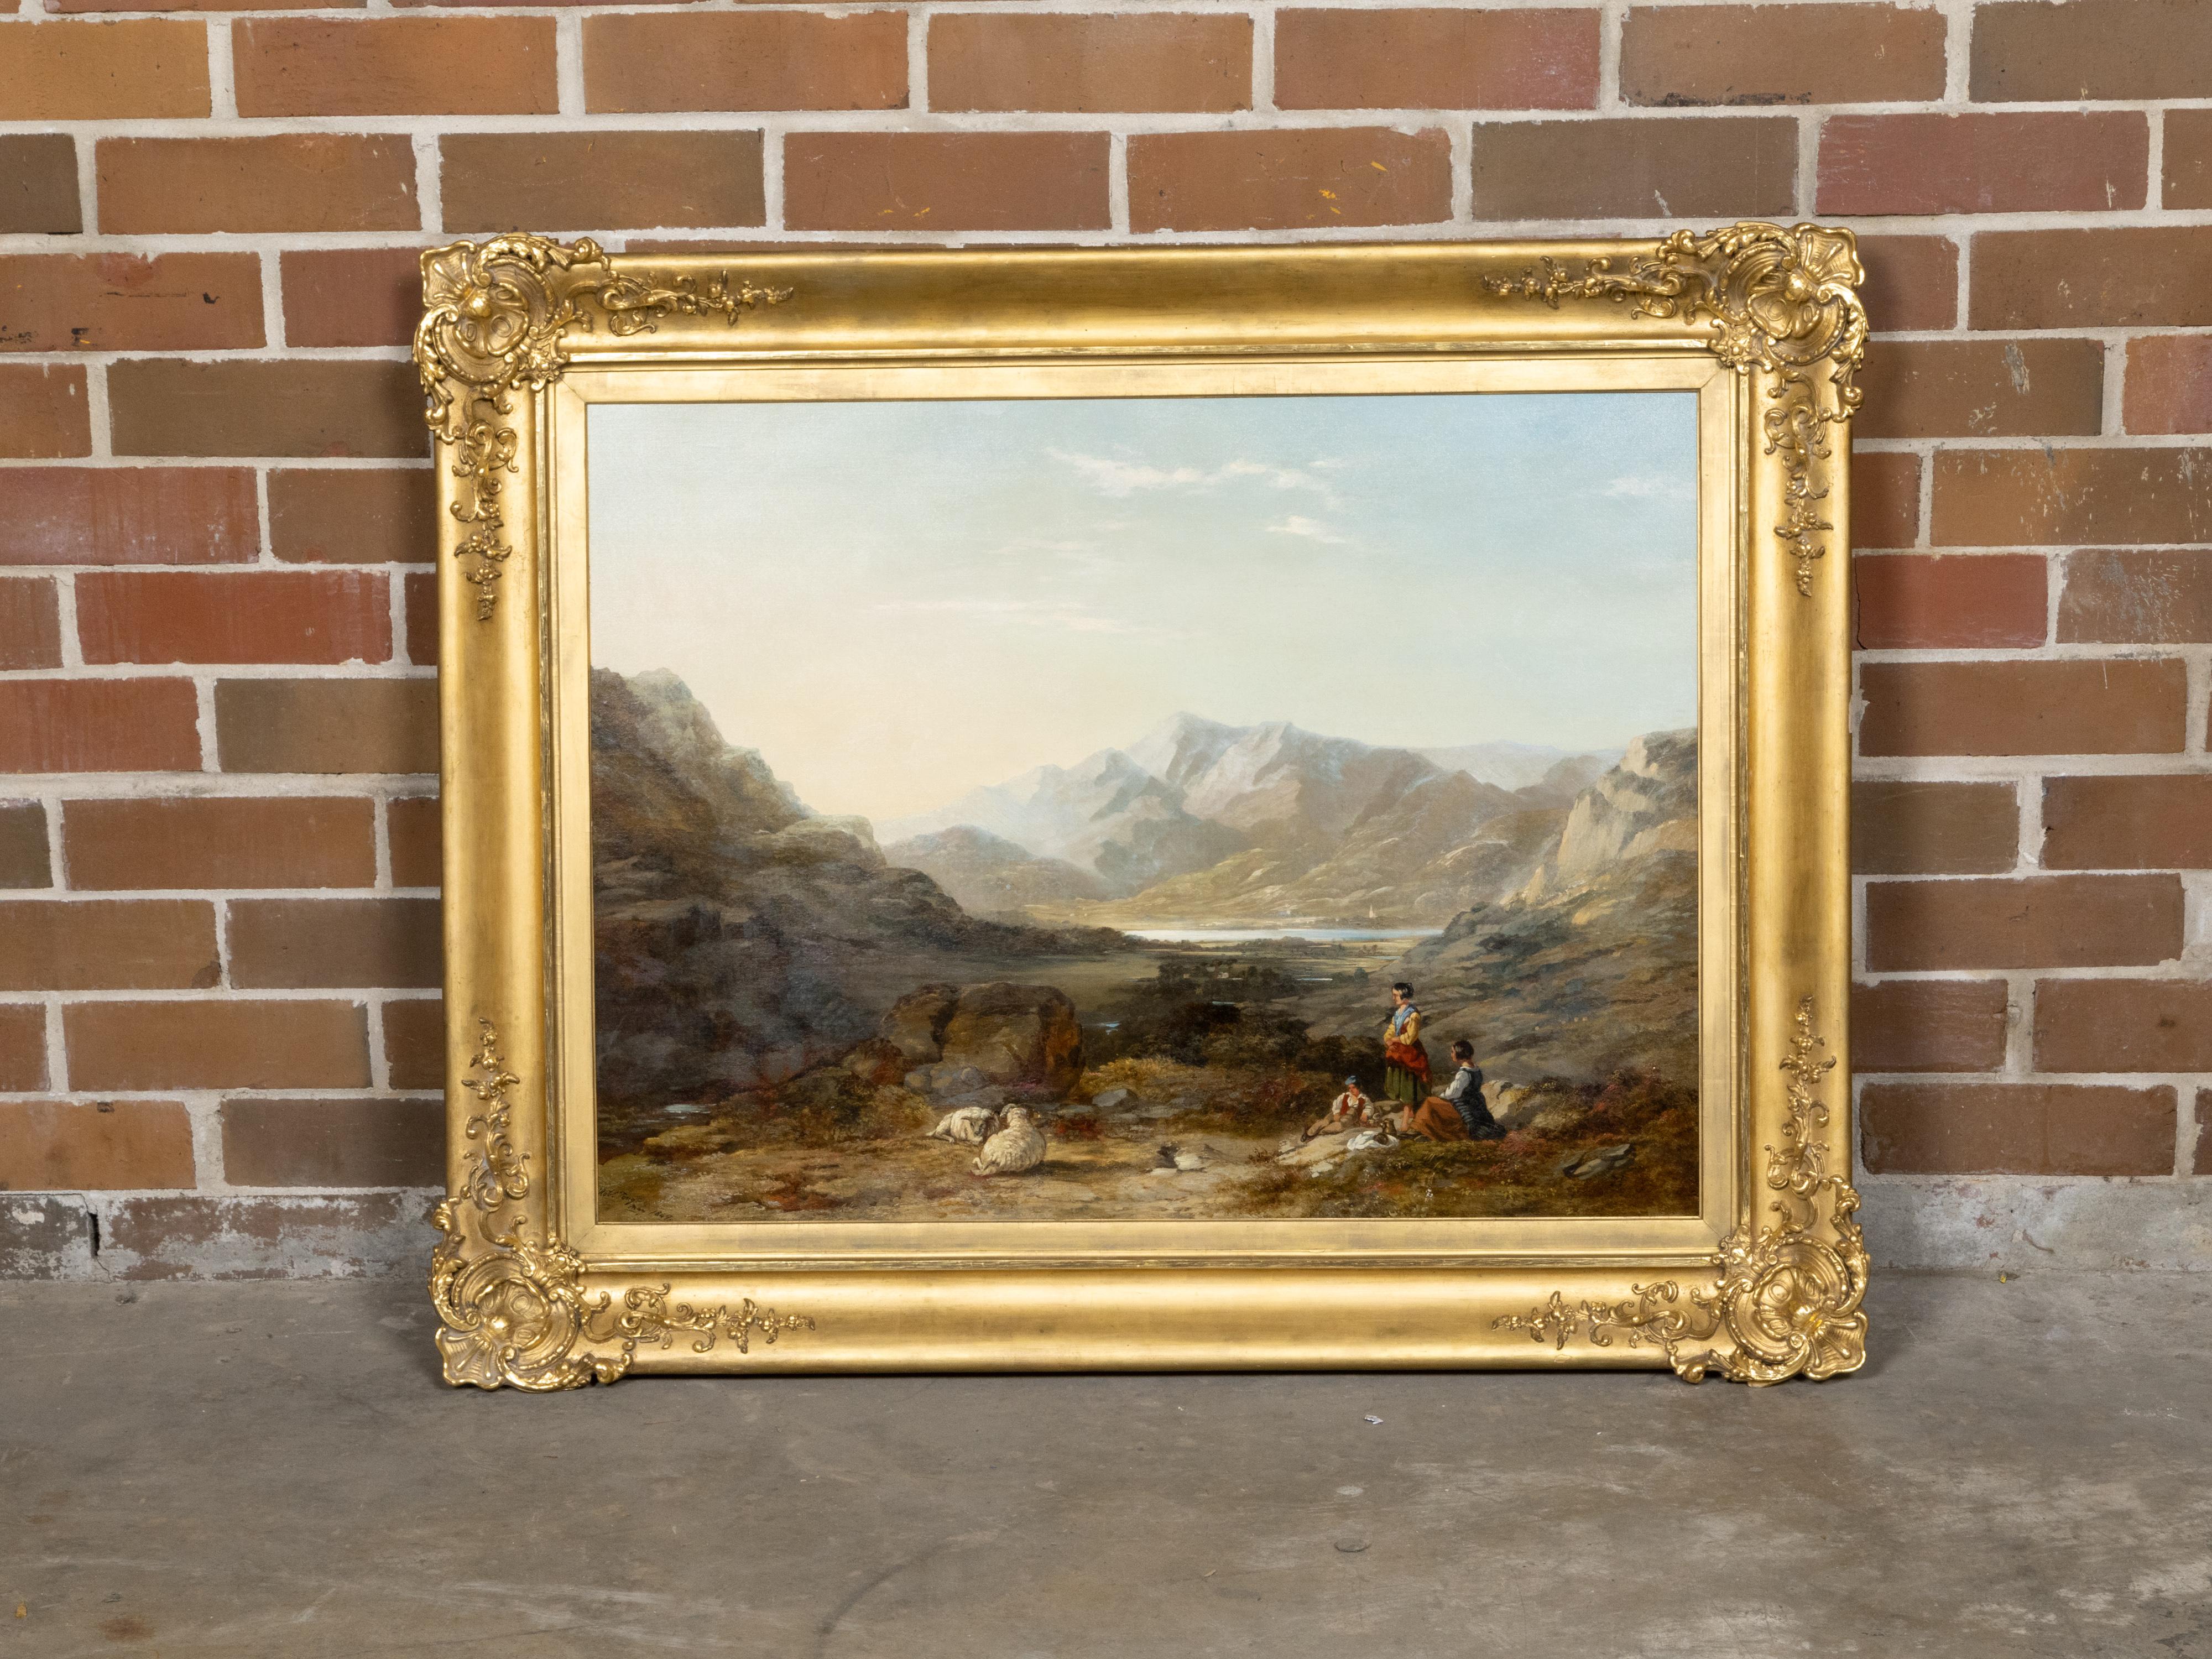 An oil on canvas landscape painting from circa 1847 by British painter Robert Tonge (1823 - 1856), signed and dated, depicting travelers and sheep in a landscape with a lake and mountains in the background. This captivating oil on canvas landscape